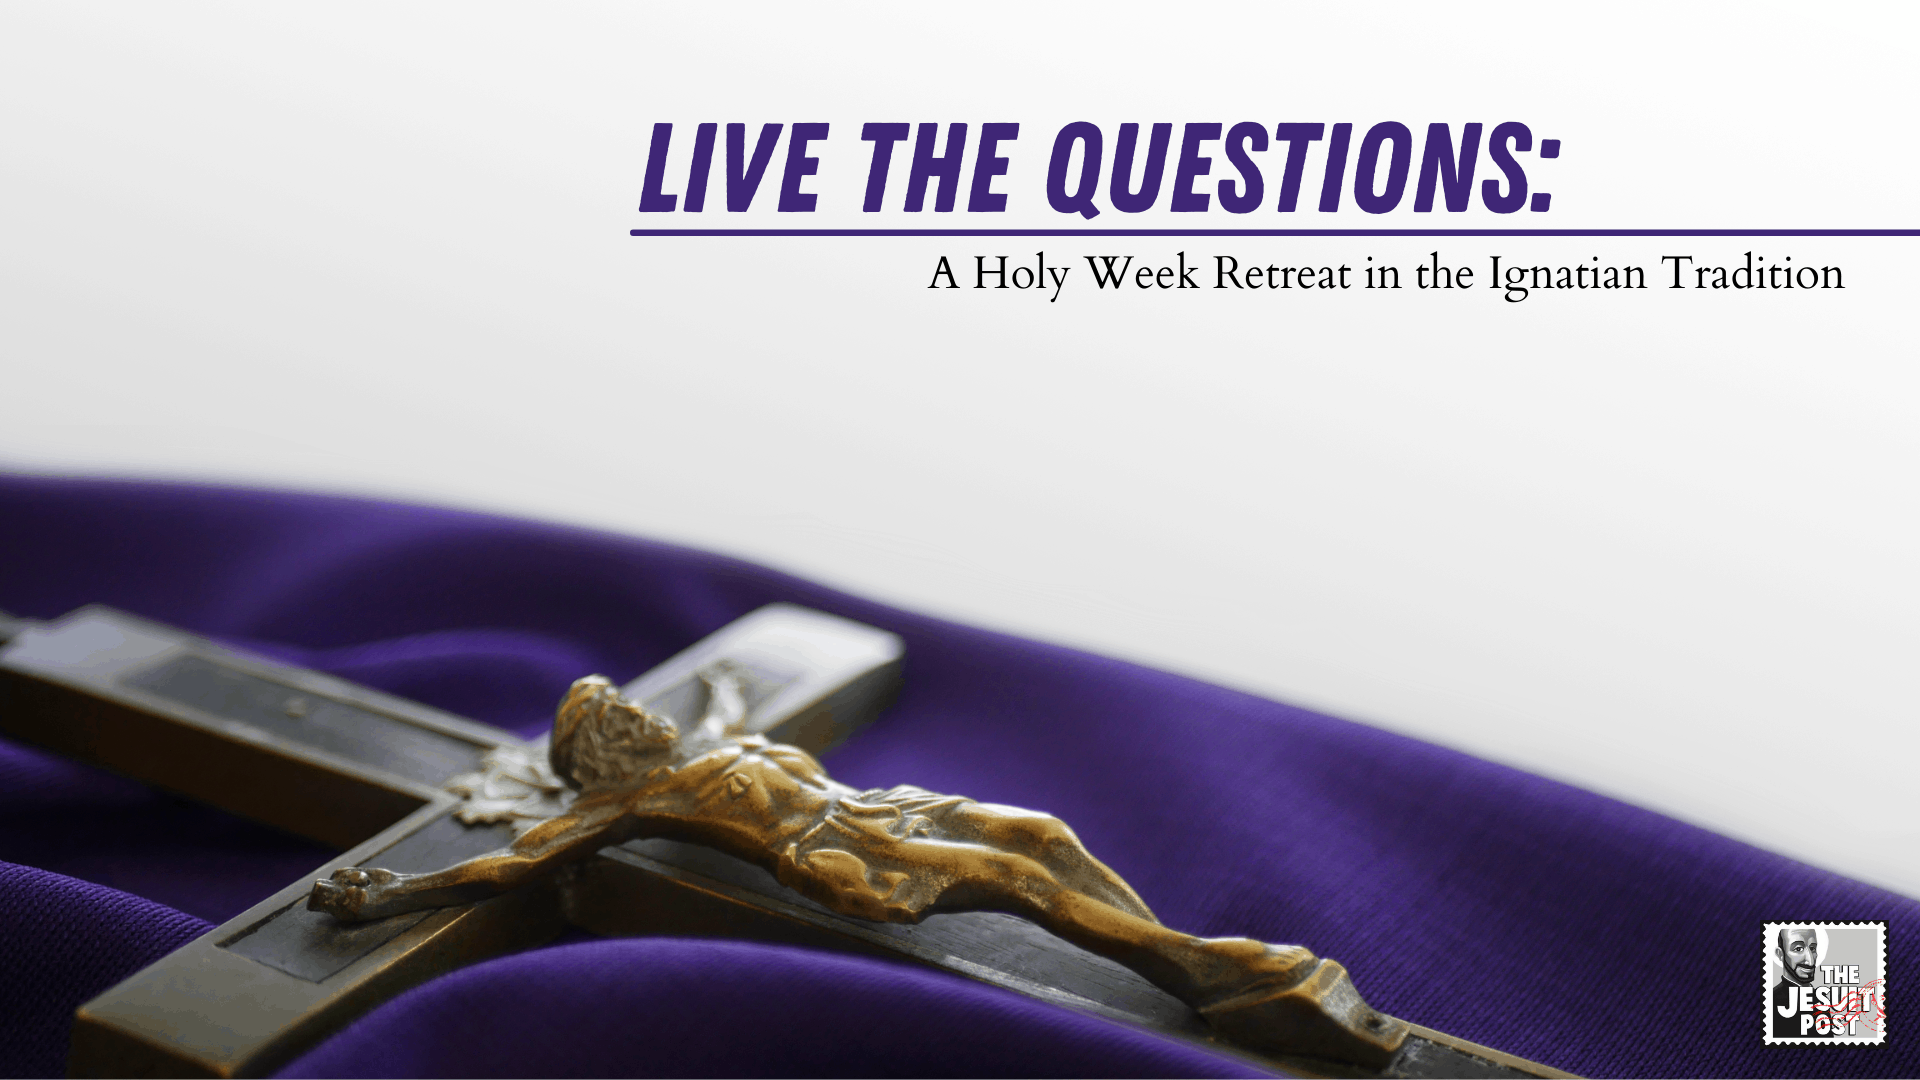 Live the Questions: A Holy Week Retreat in the Ignatian Tradition